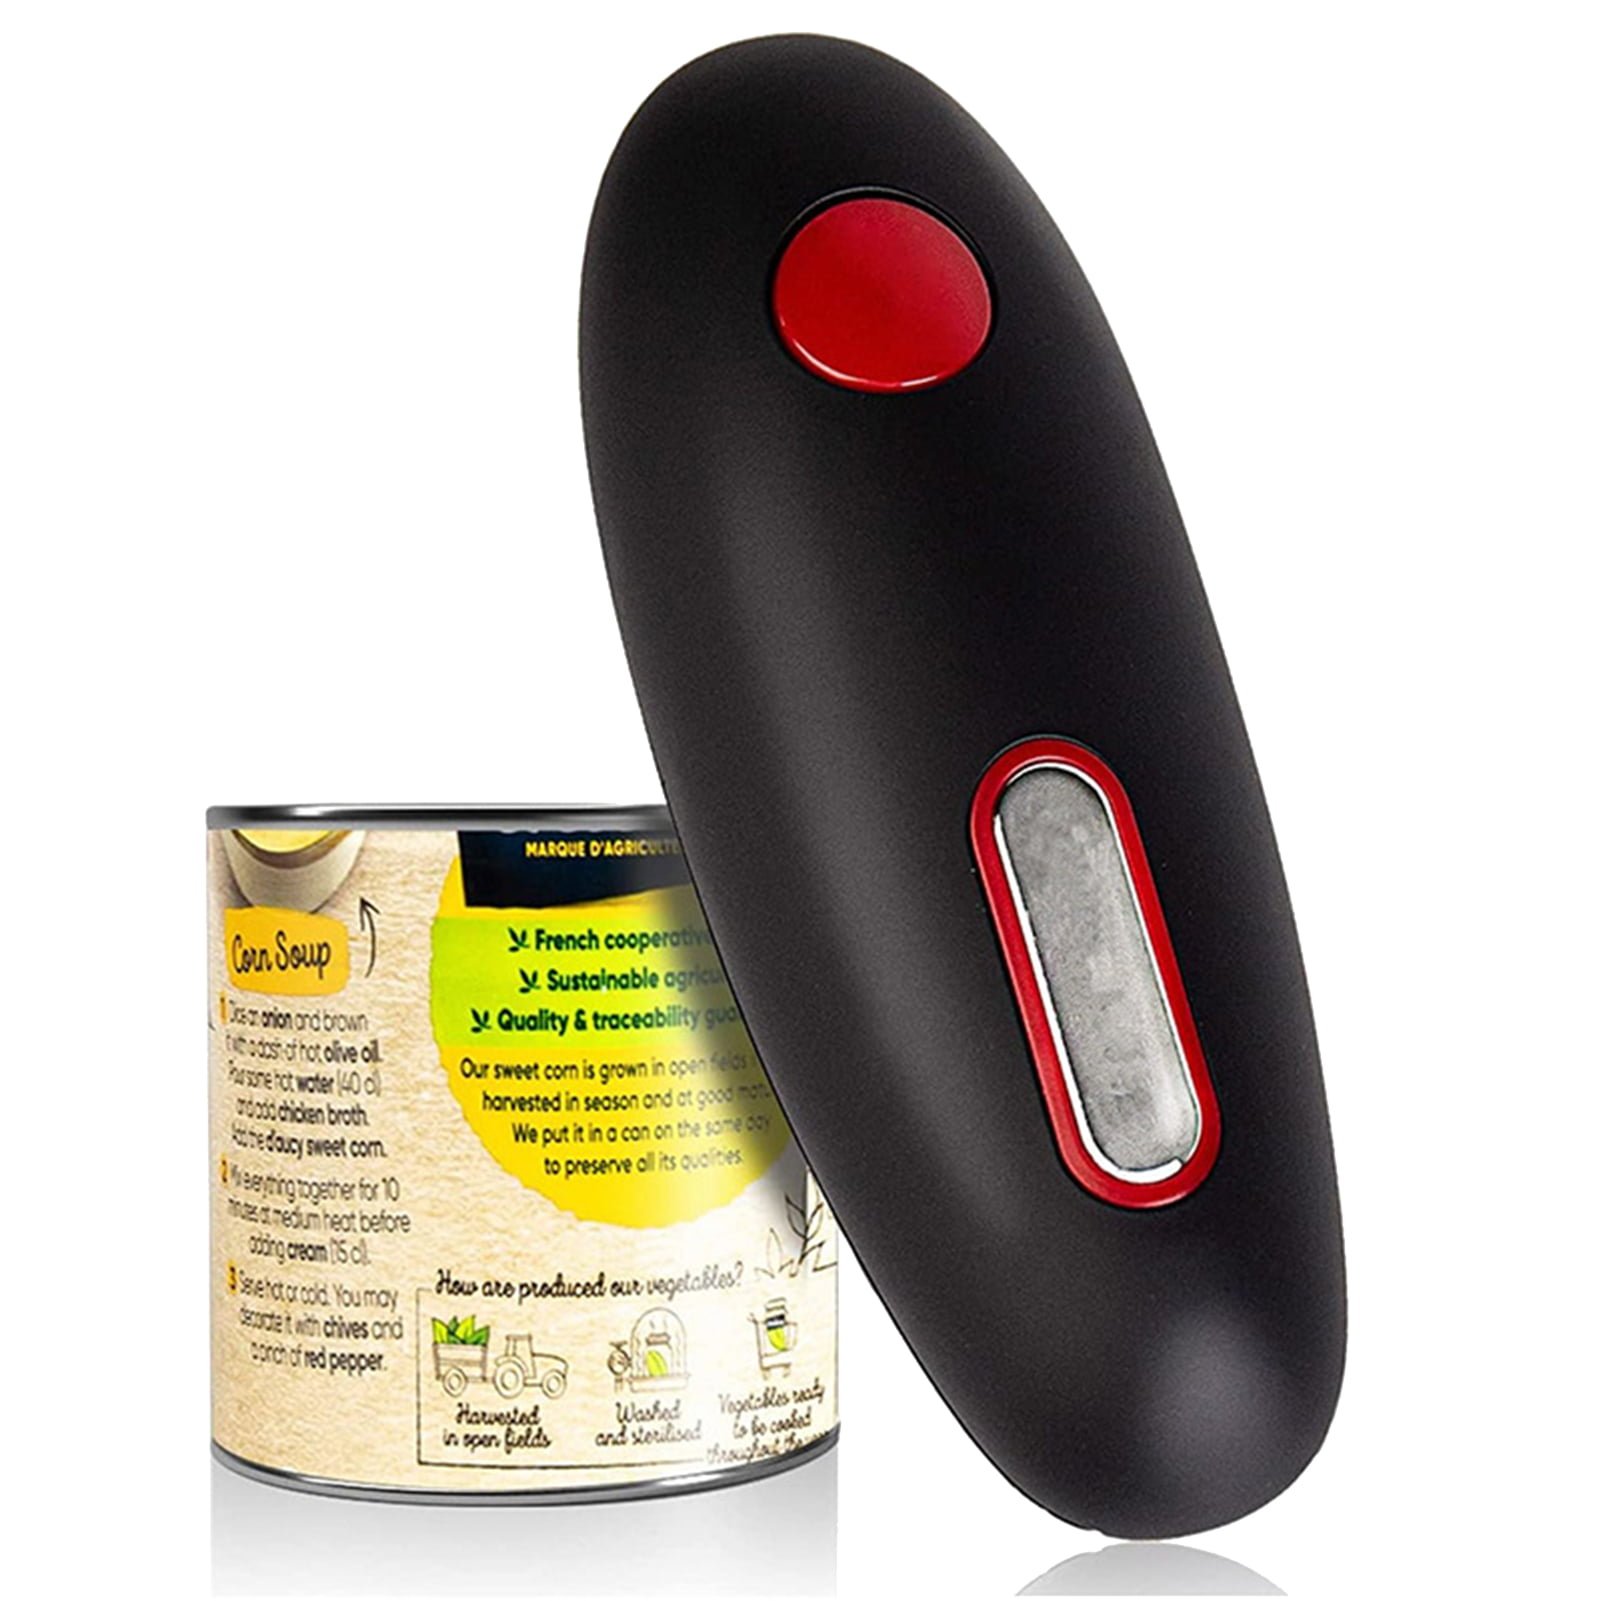 Food-Safe and Battery Operated Handheld Can Opener Kitchen Mama Electric Can Opener: Open Your Cans with A Simple Push of Button Red No Sharp Edge